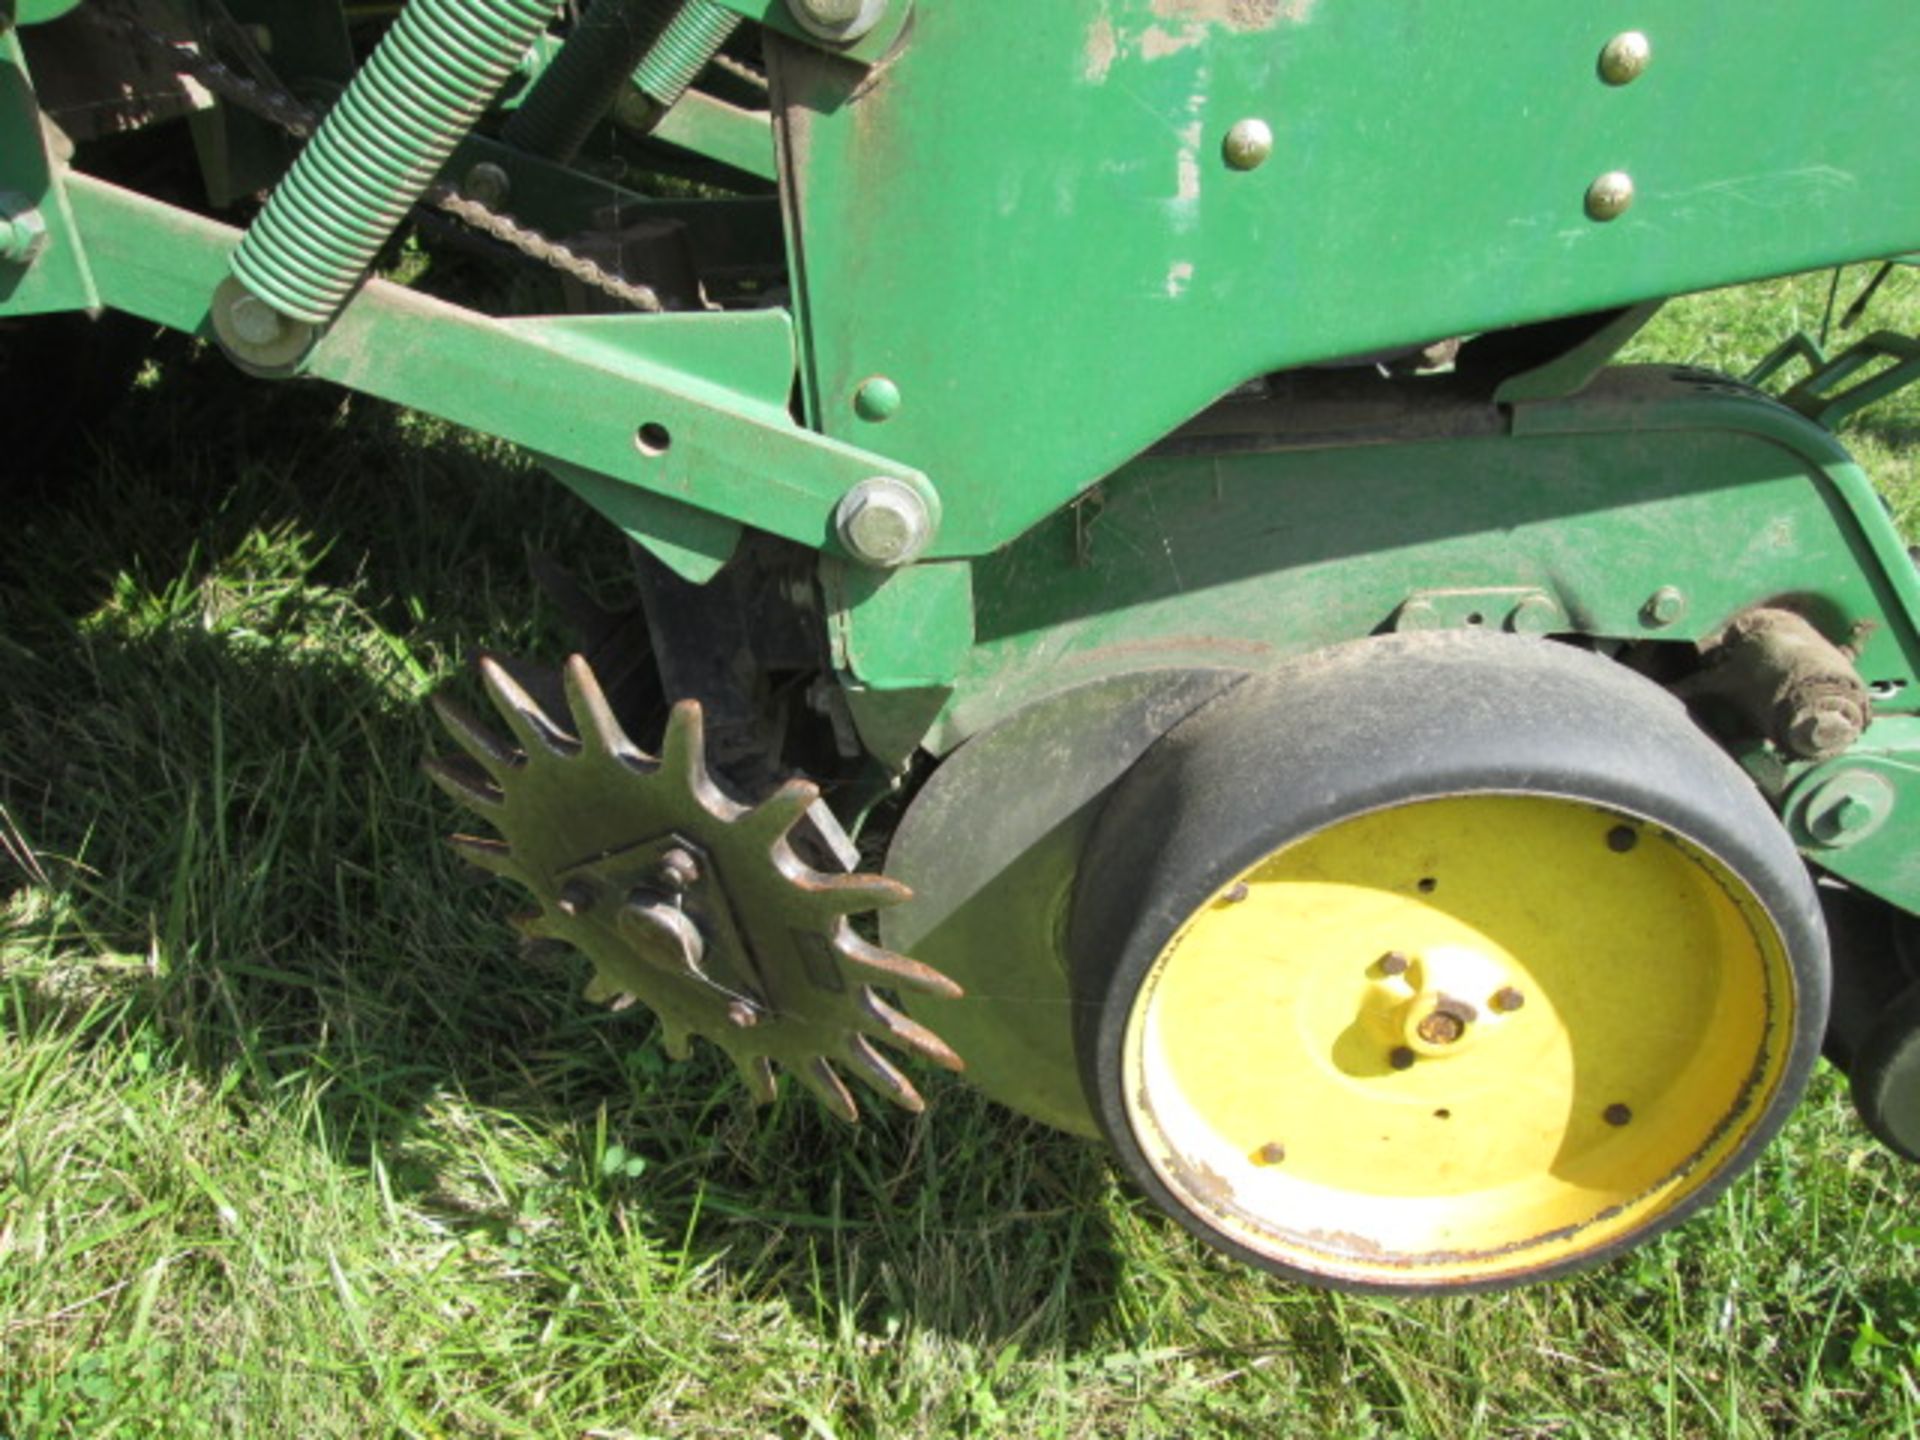 JD 7200 12R30 PLANTER, HYDR WING FOLD,TRASH WHIPPERS, INSECT, 250 MONT - Image 7 of 8